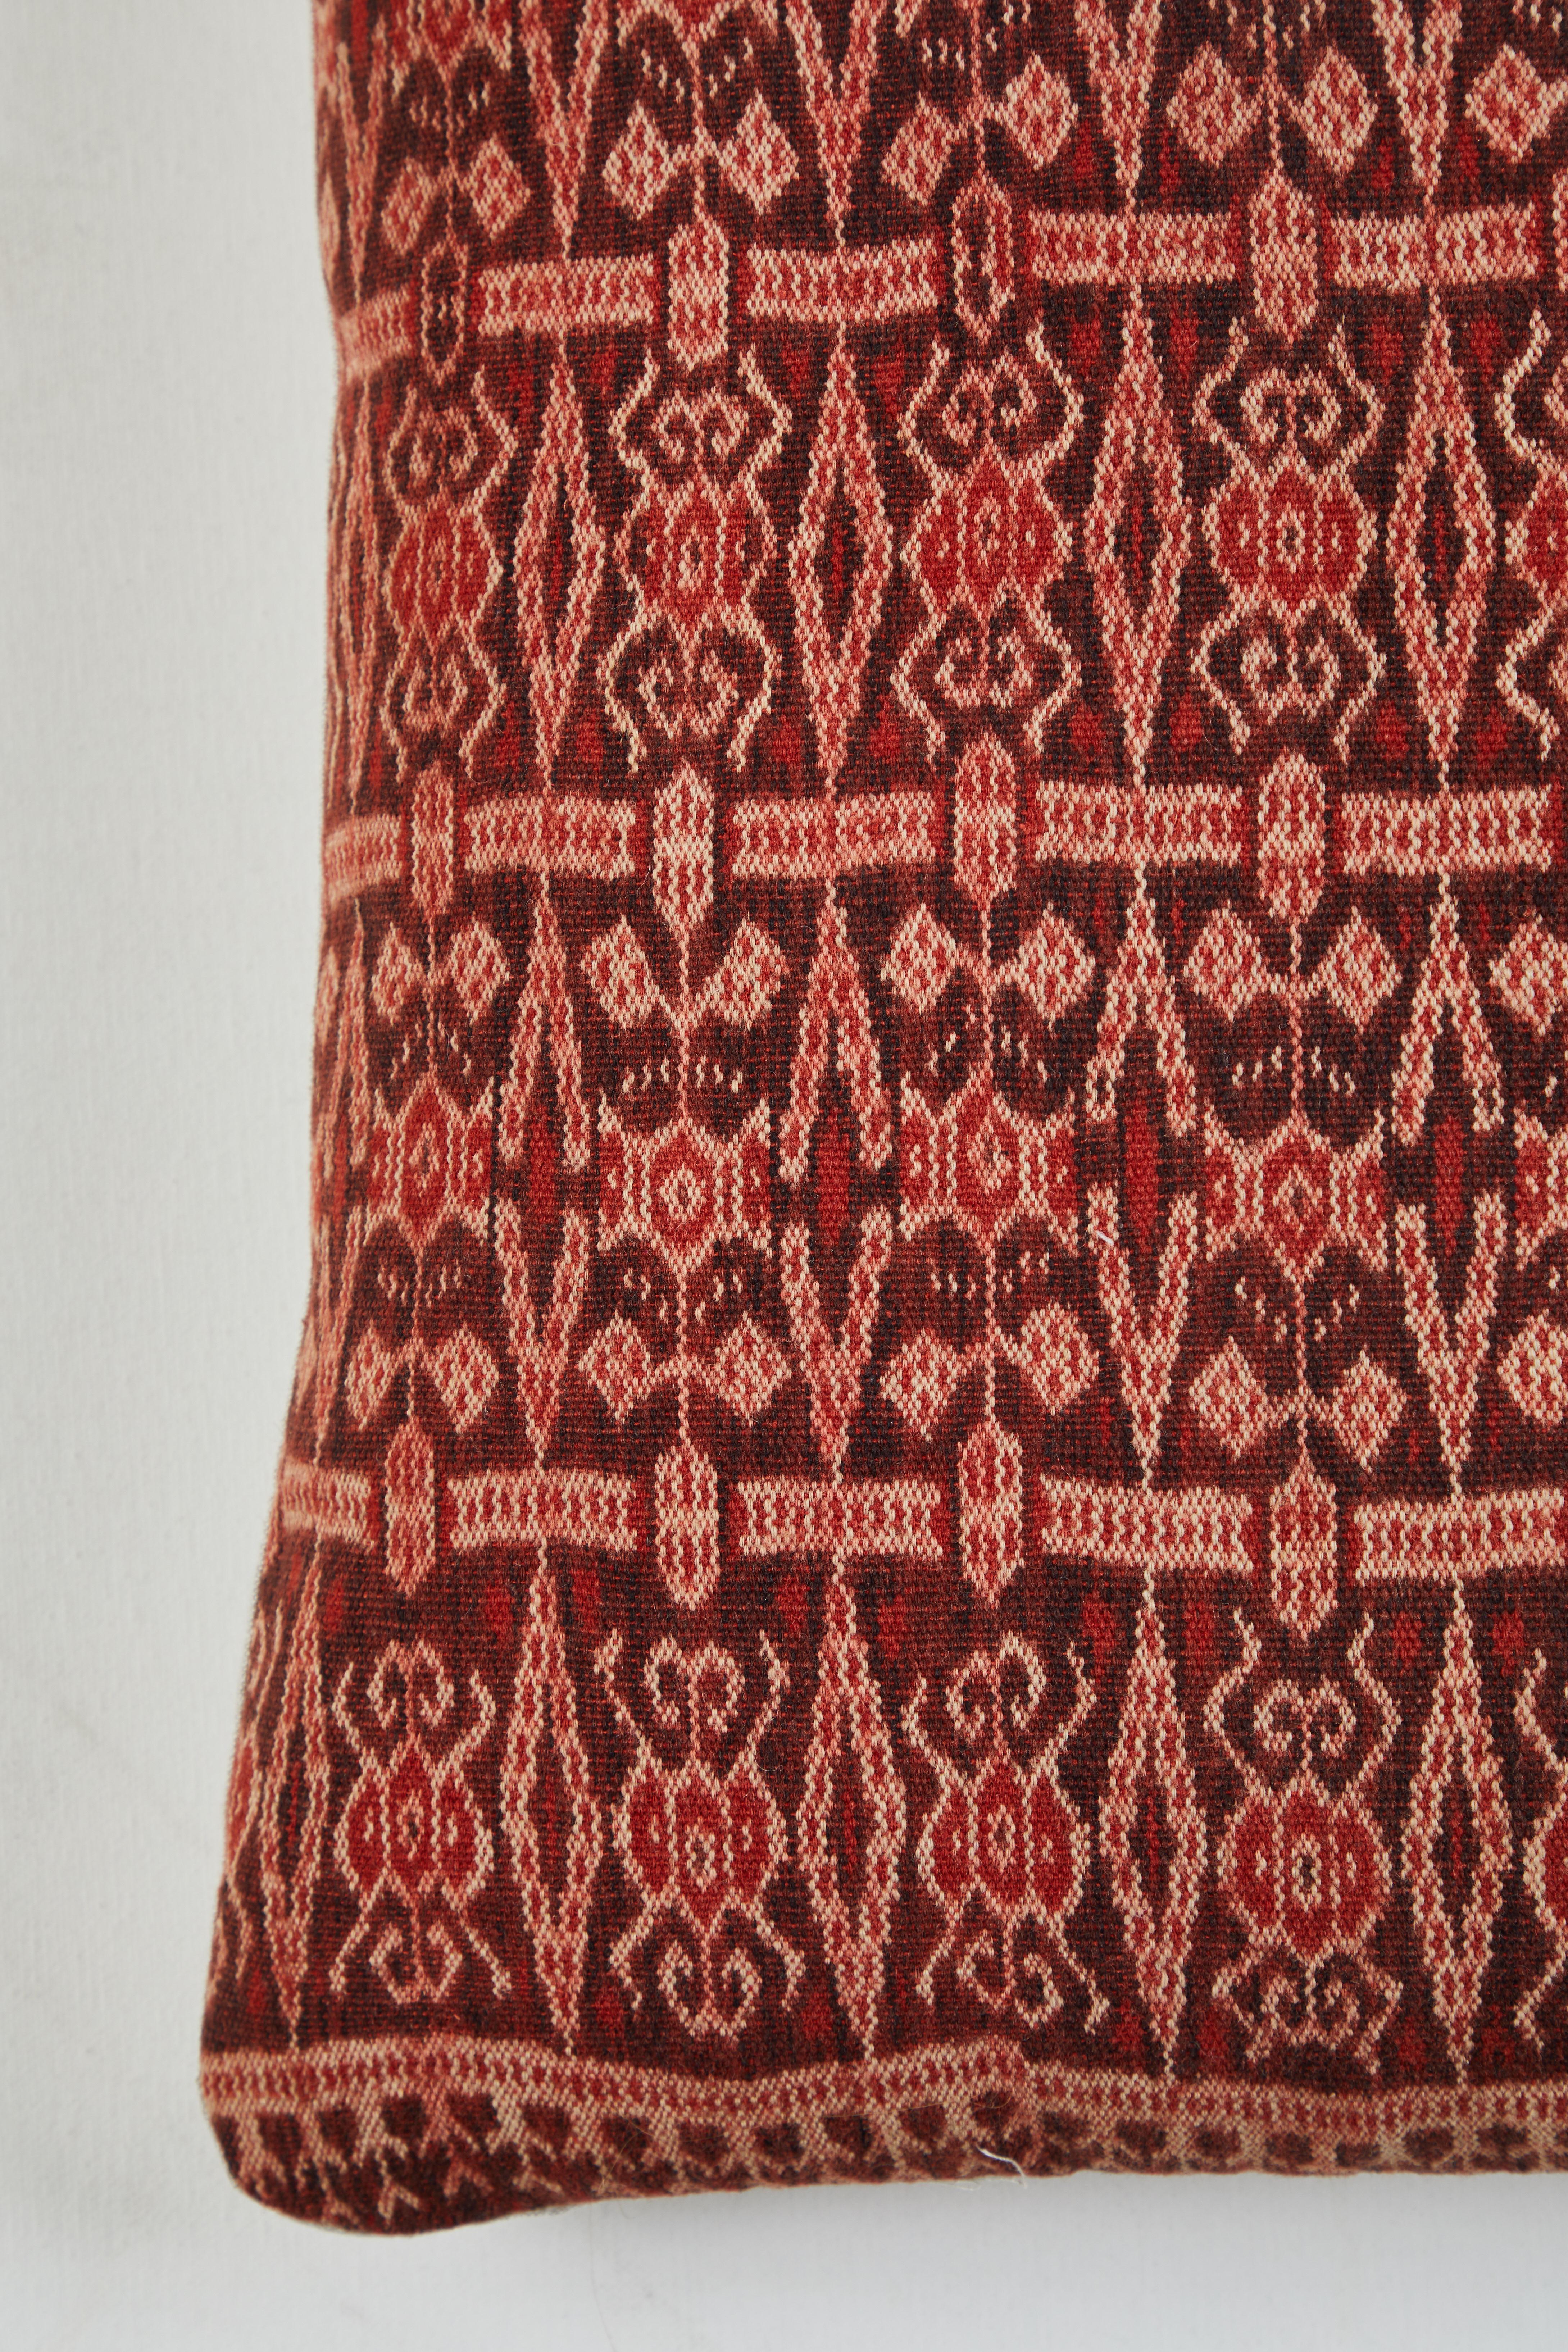 Pat McGann Workshop
Midcentury Southeast Asian handwoven ikat textile. Red, turquoise, gold, purple and pale pink. Natural linen backs. Invisible zippers. Feather and down fill.

 